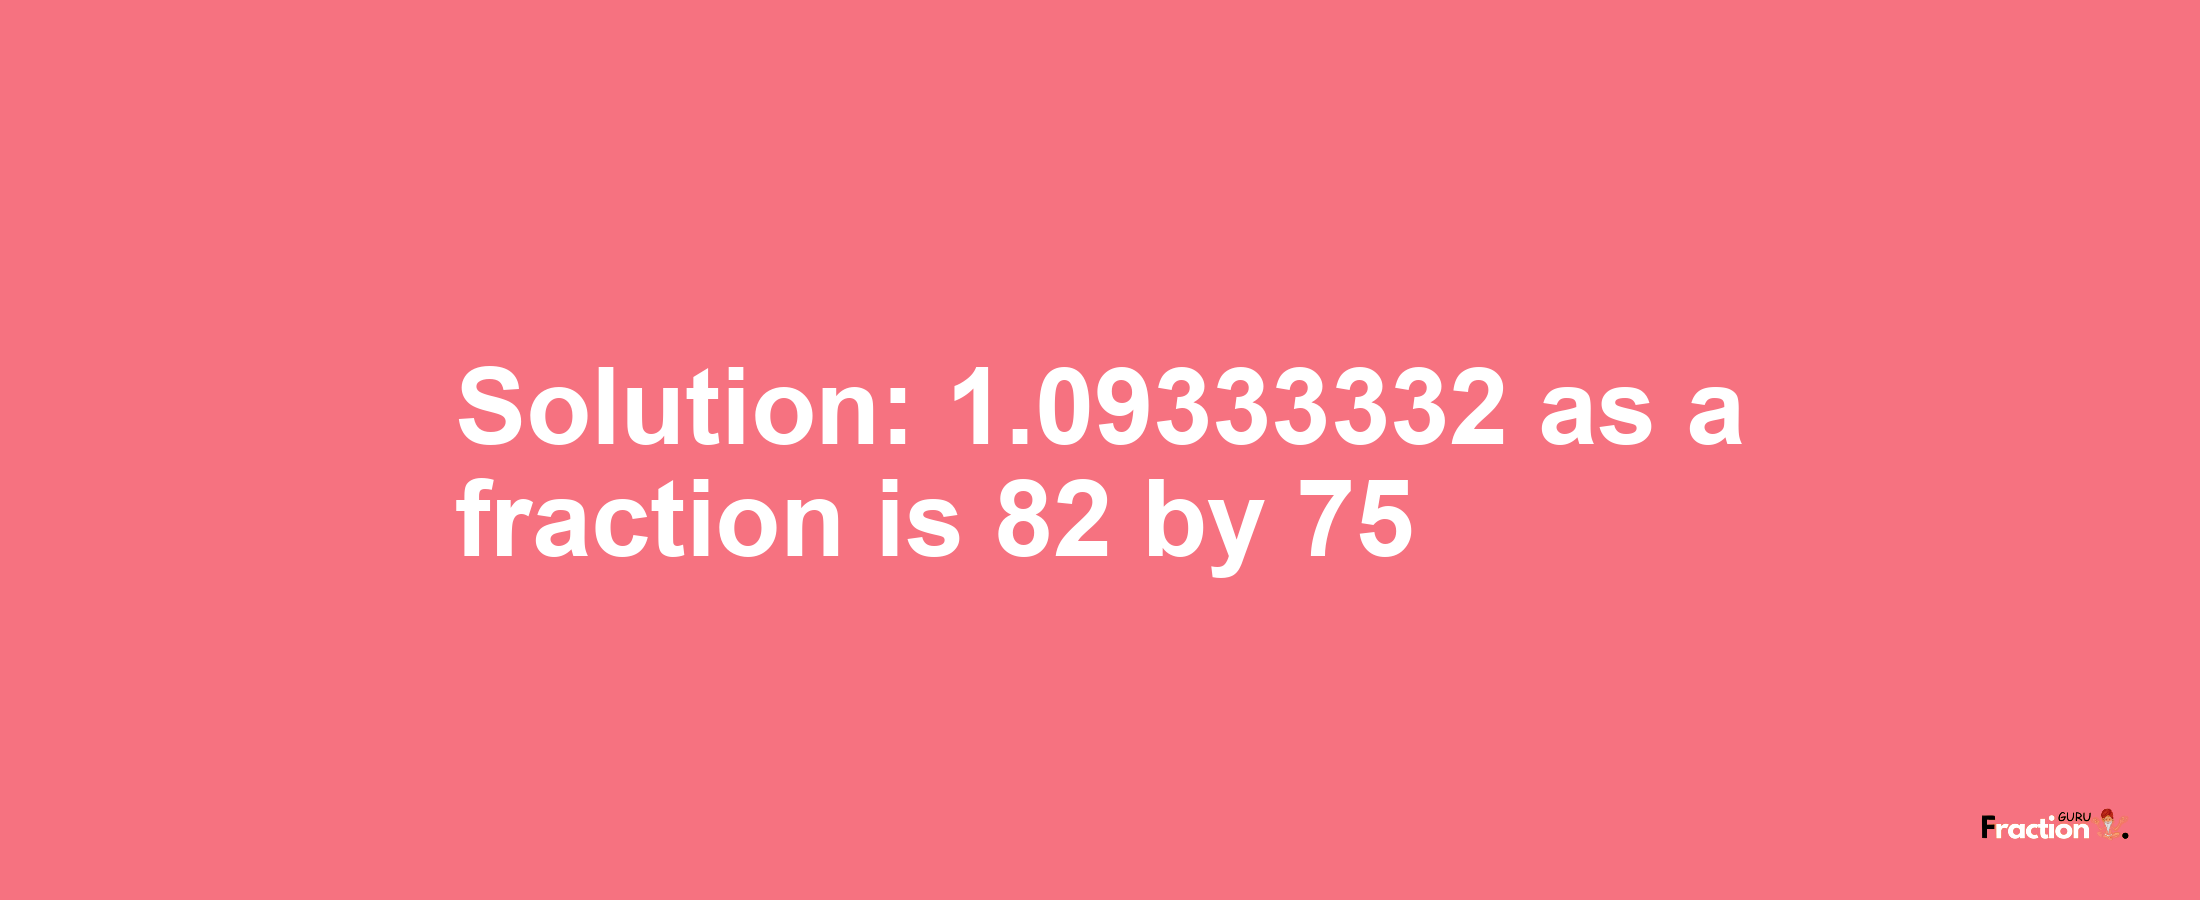 Solution:1.09333332 as a fraction is 82/75